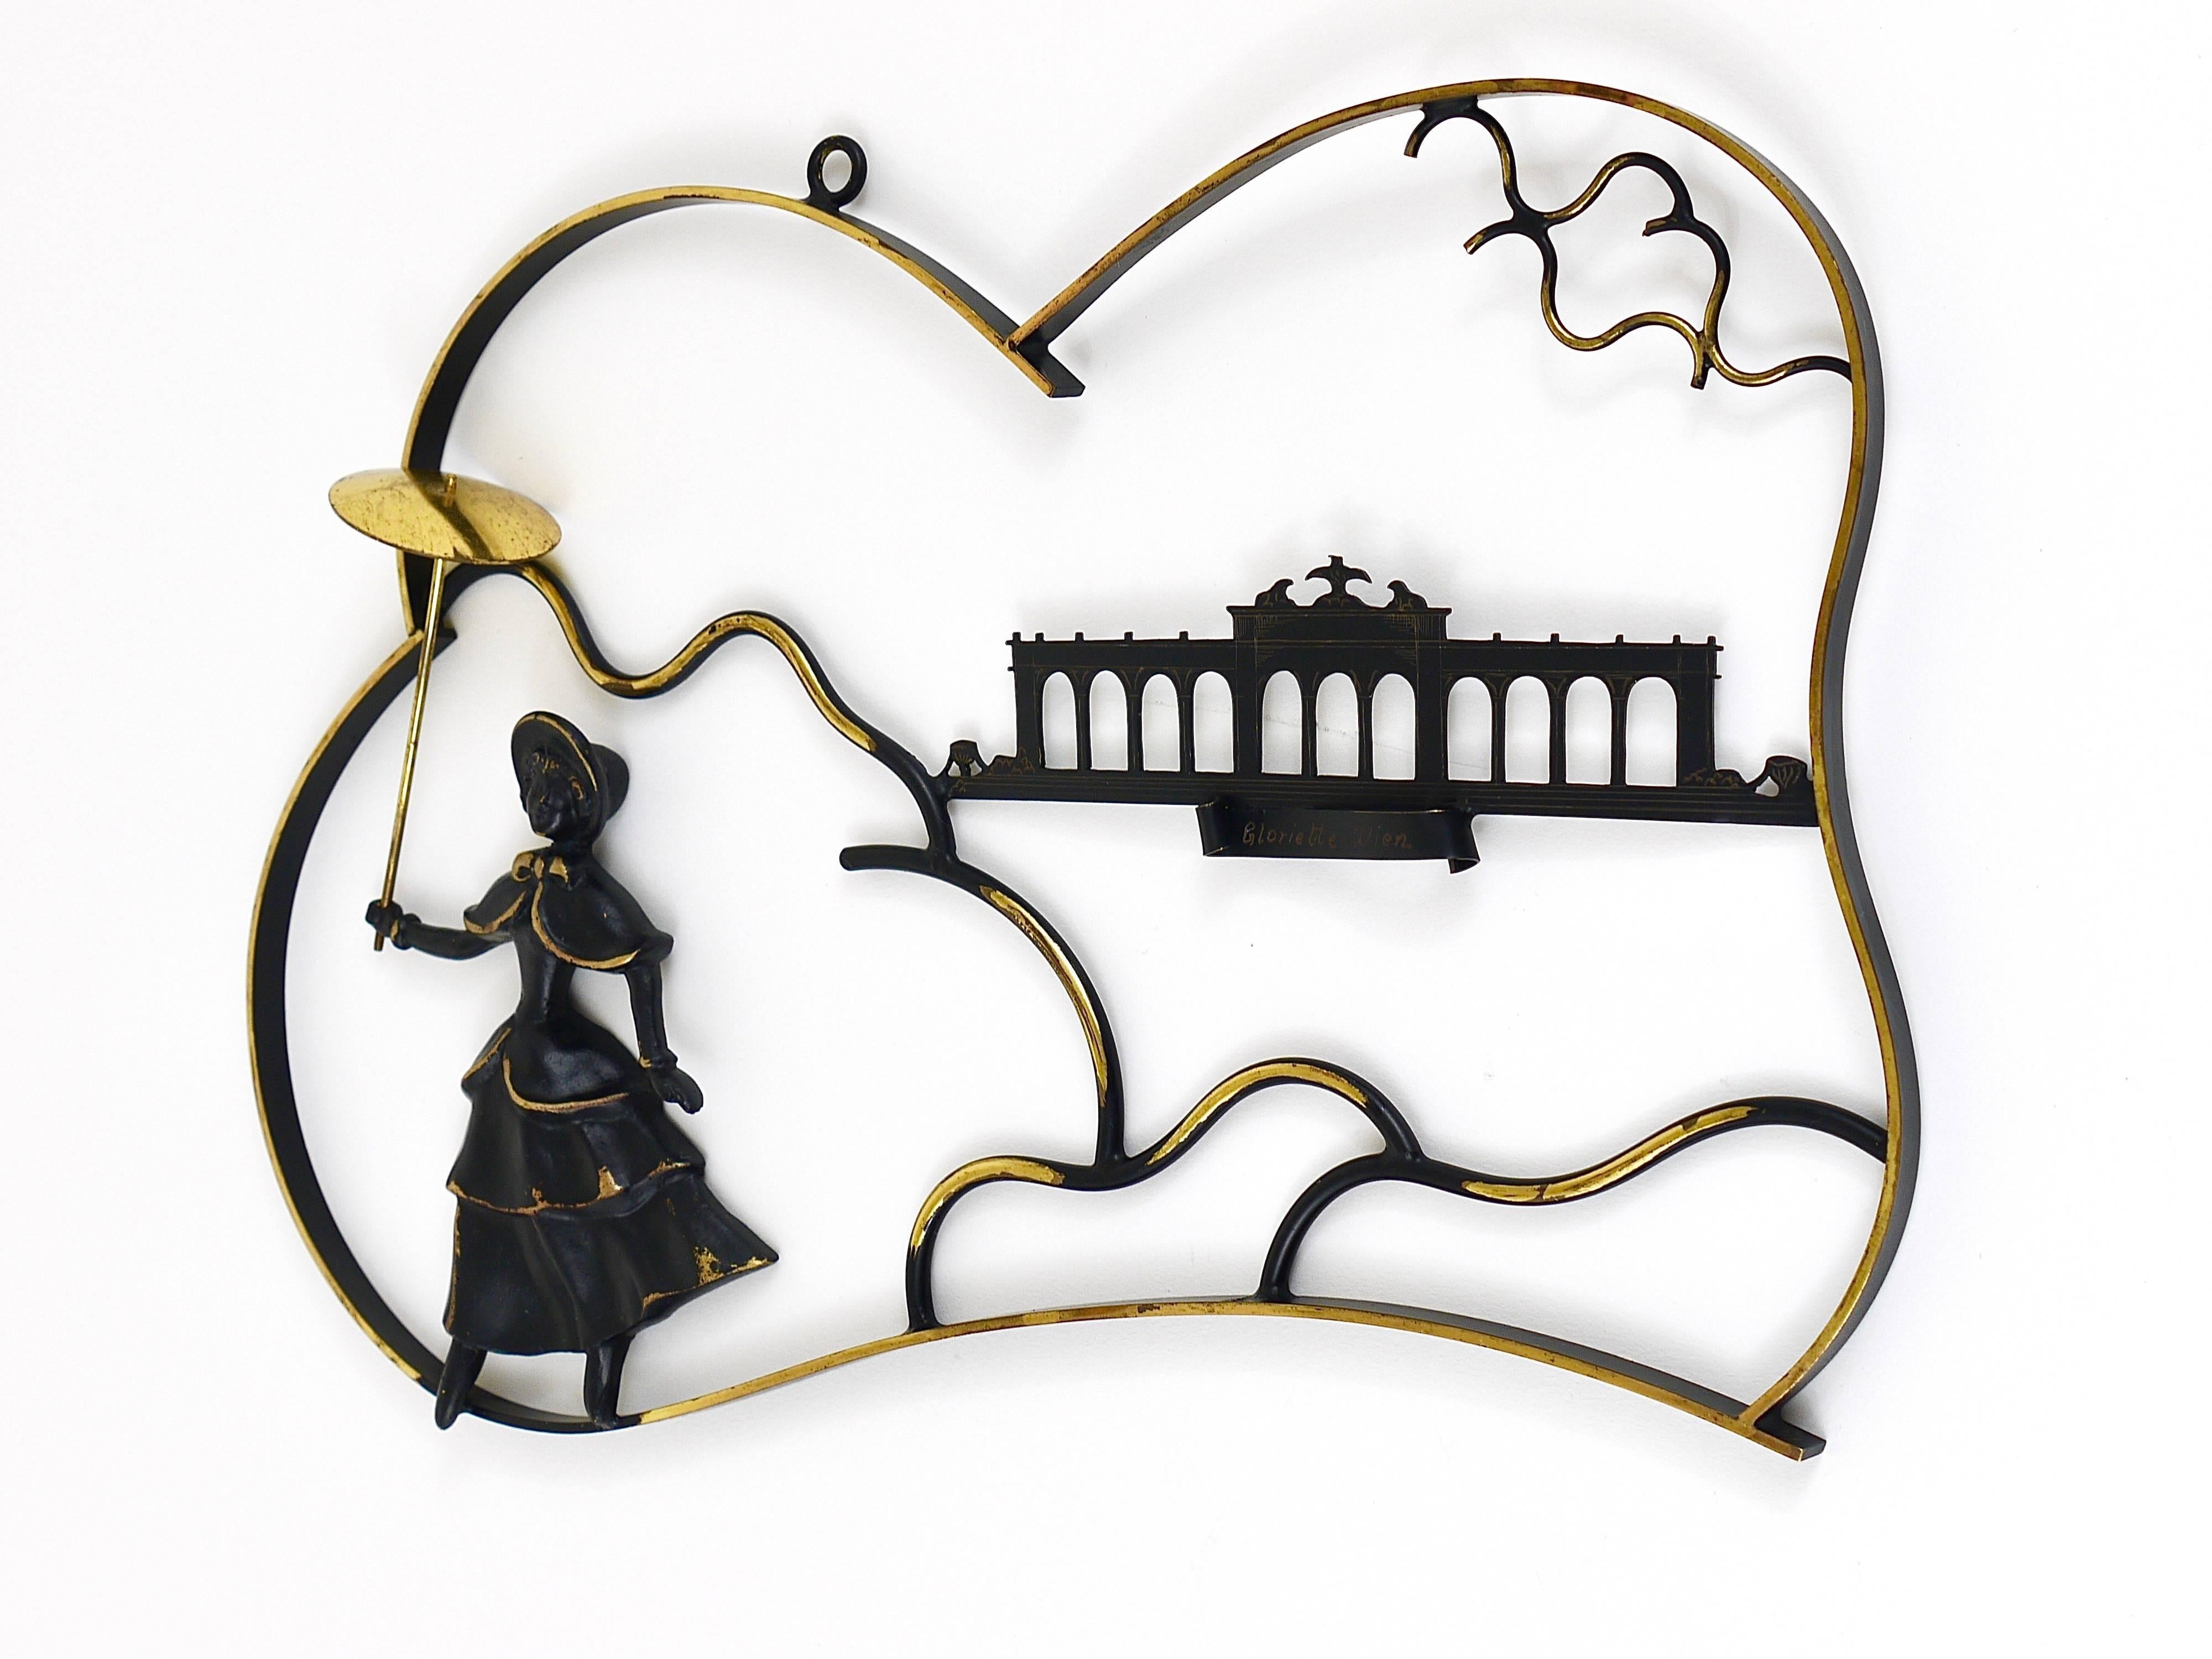 A lovely midcentury mural, displaying a woman in a Biedermeier dress with umbrella in front of the Gloriette in Vienna, all made of brass. A beautiful design by Walter Bosse, manufactured in the 1950s by Hertha Baller, Austria. In excellent